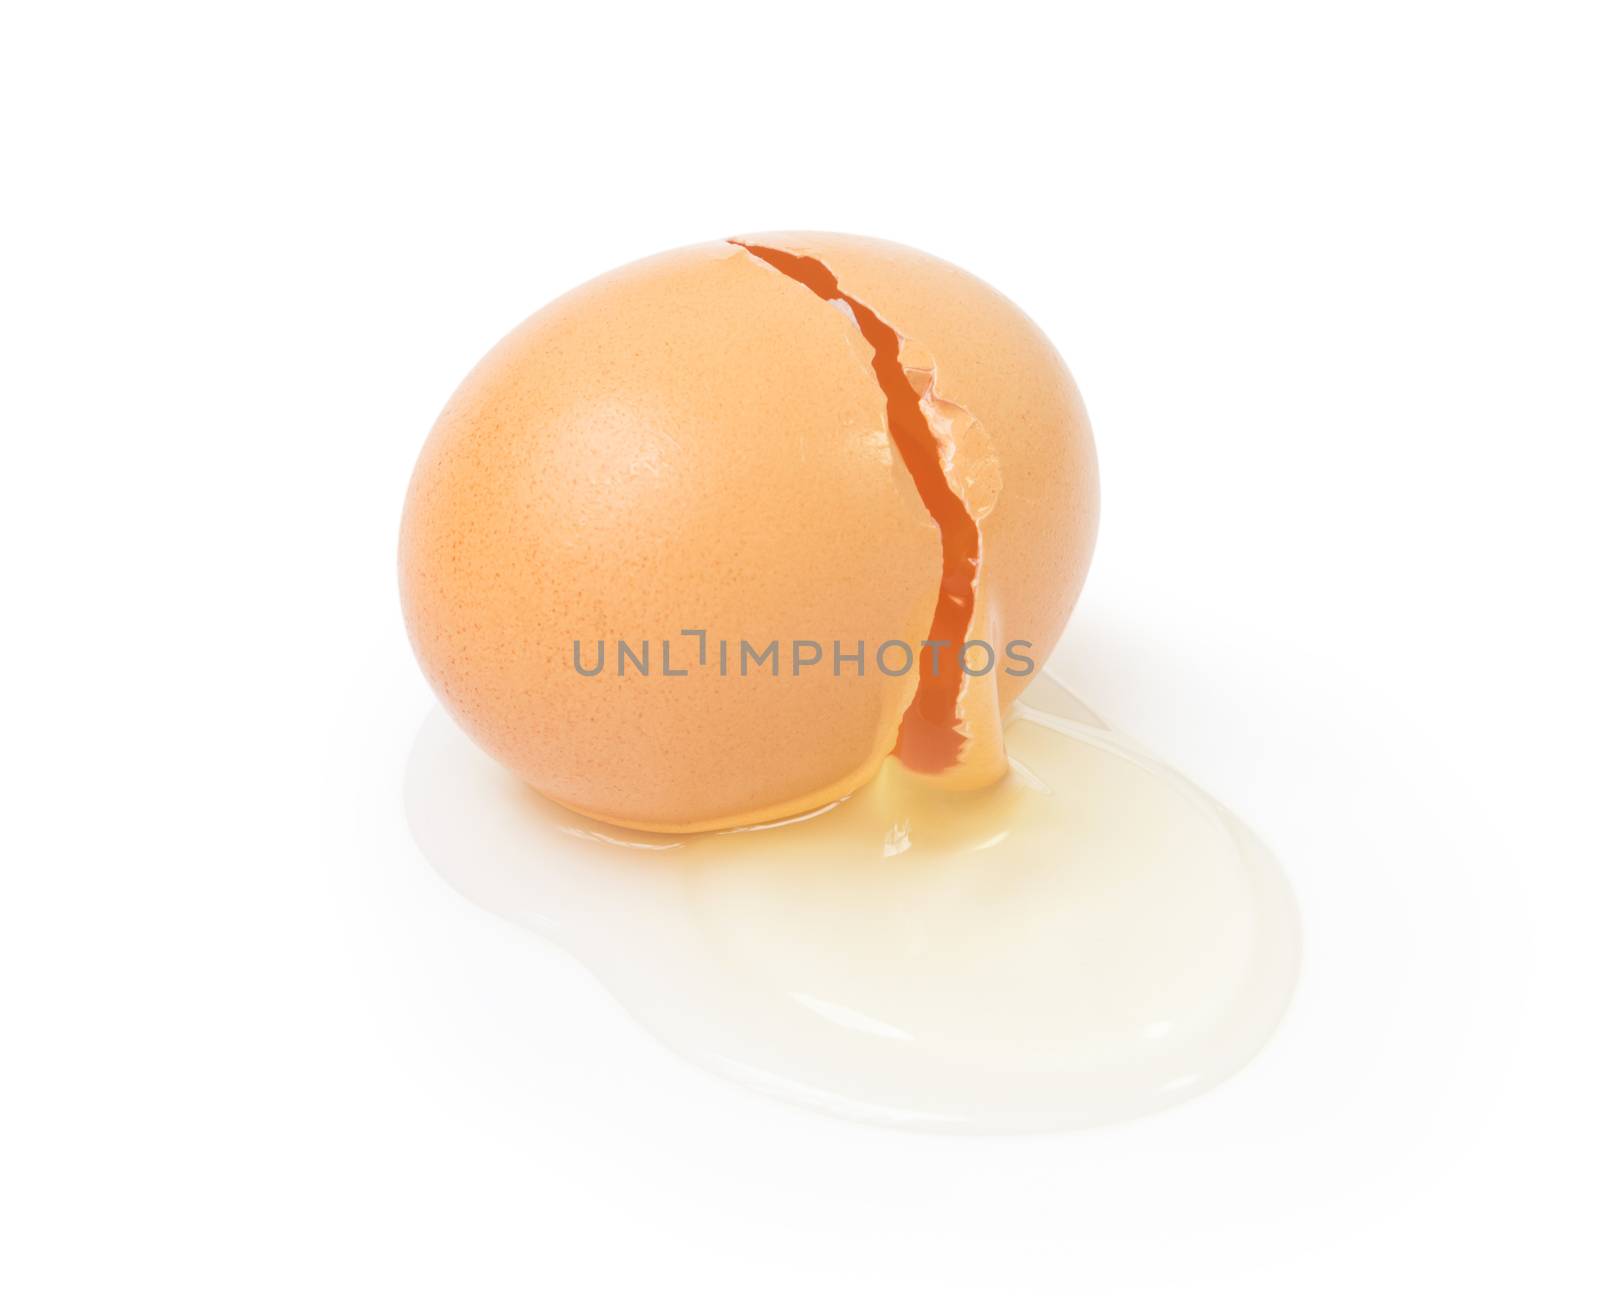 Broken eggs isolated on white background with clipping path by pt.pongsak@gmail.com